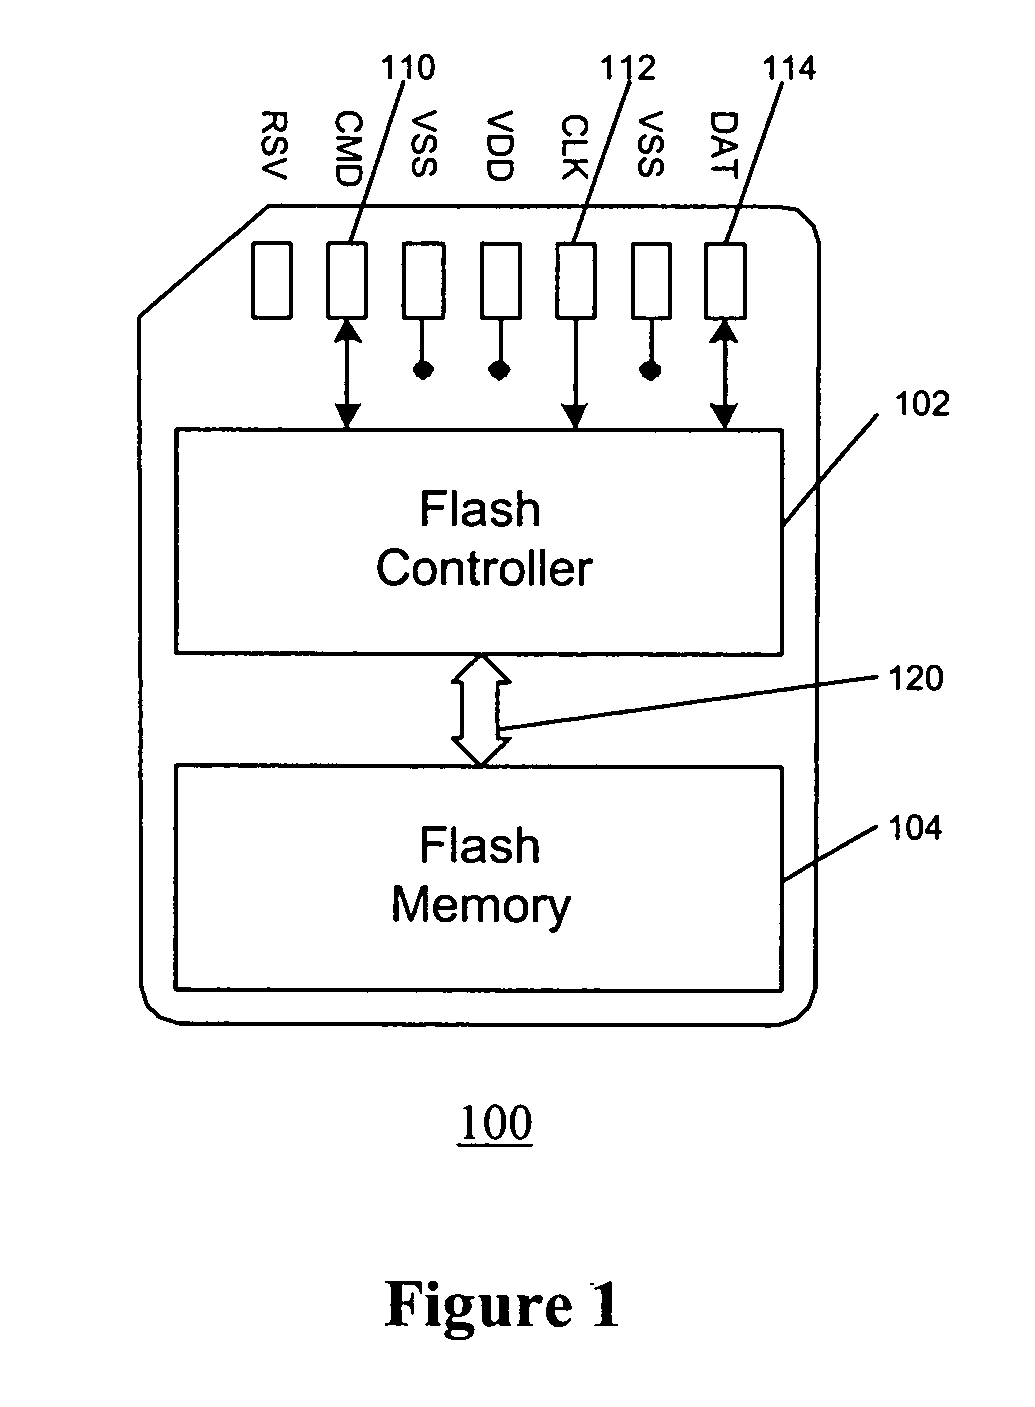 Flash memory system with a high-speed flash controller